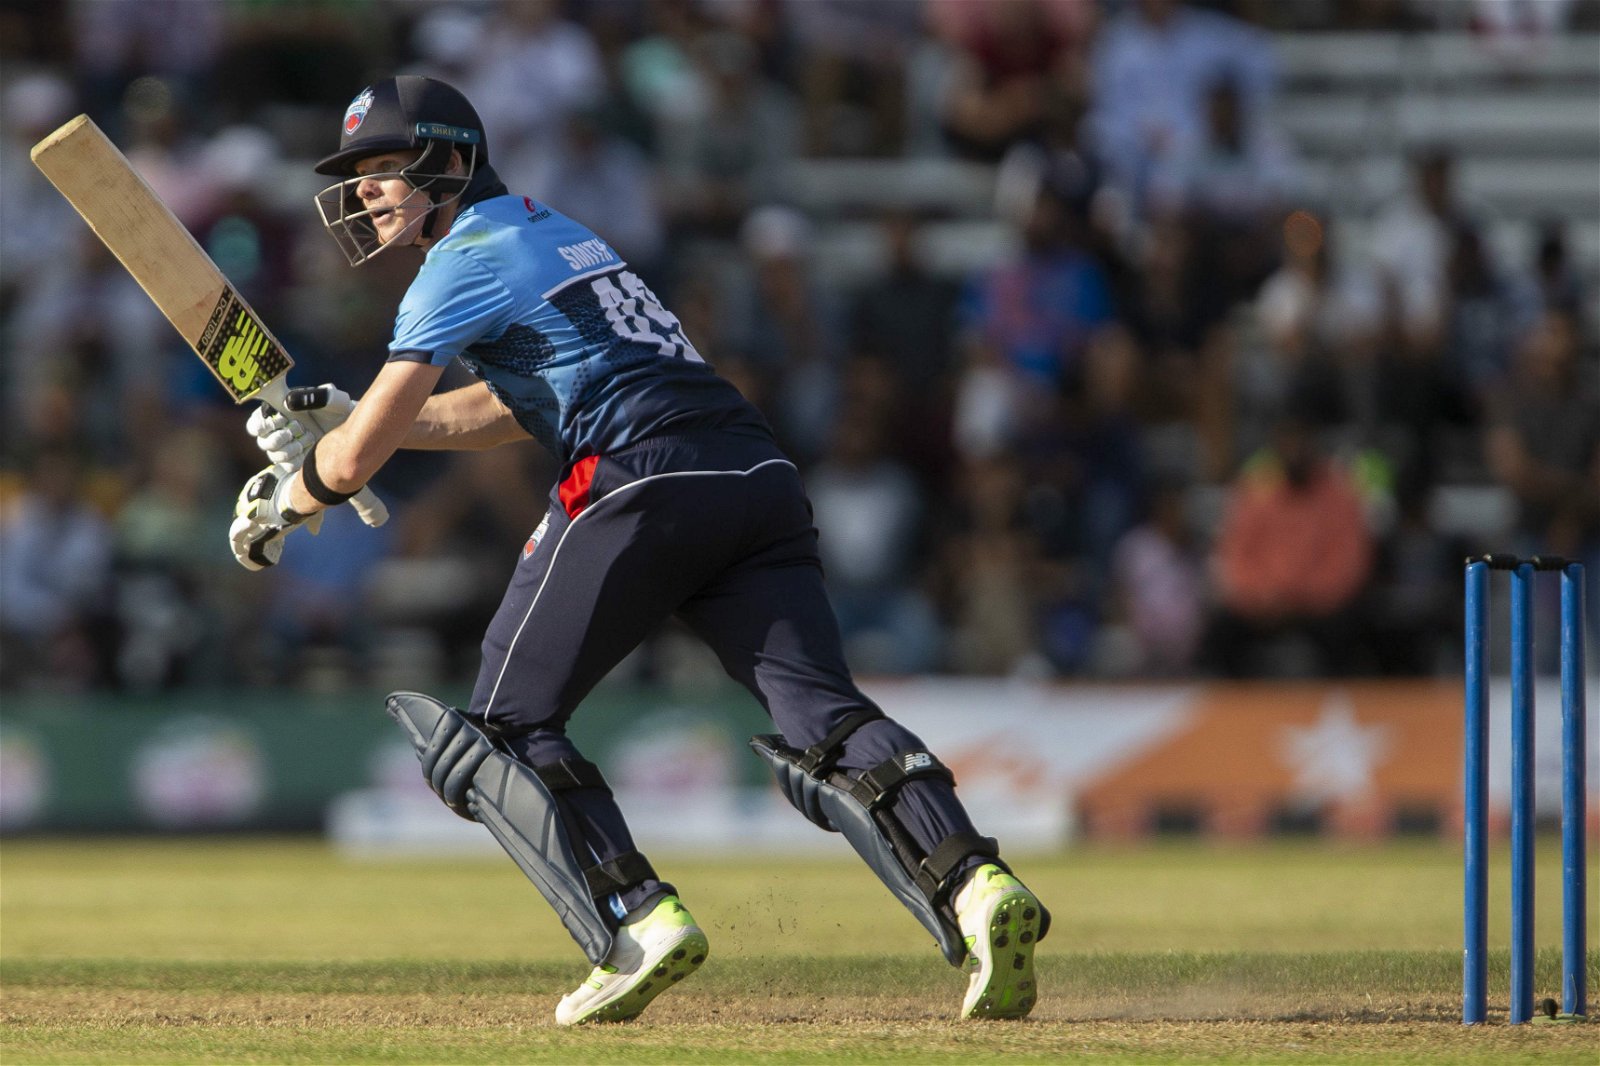 Steve Smith hit a brilliant 61 off 41 balls for Toronto Nationals